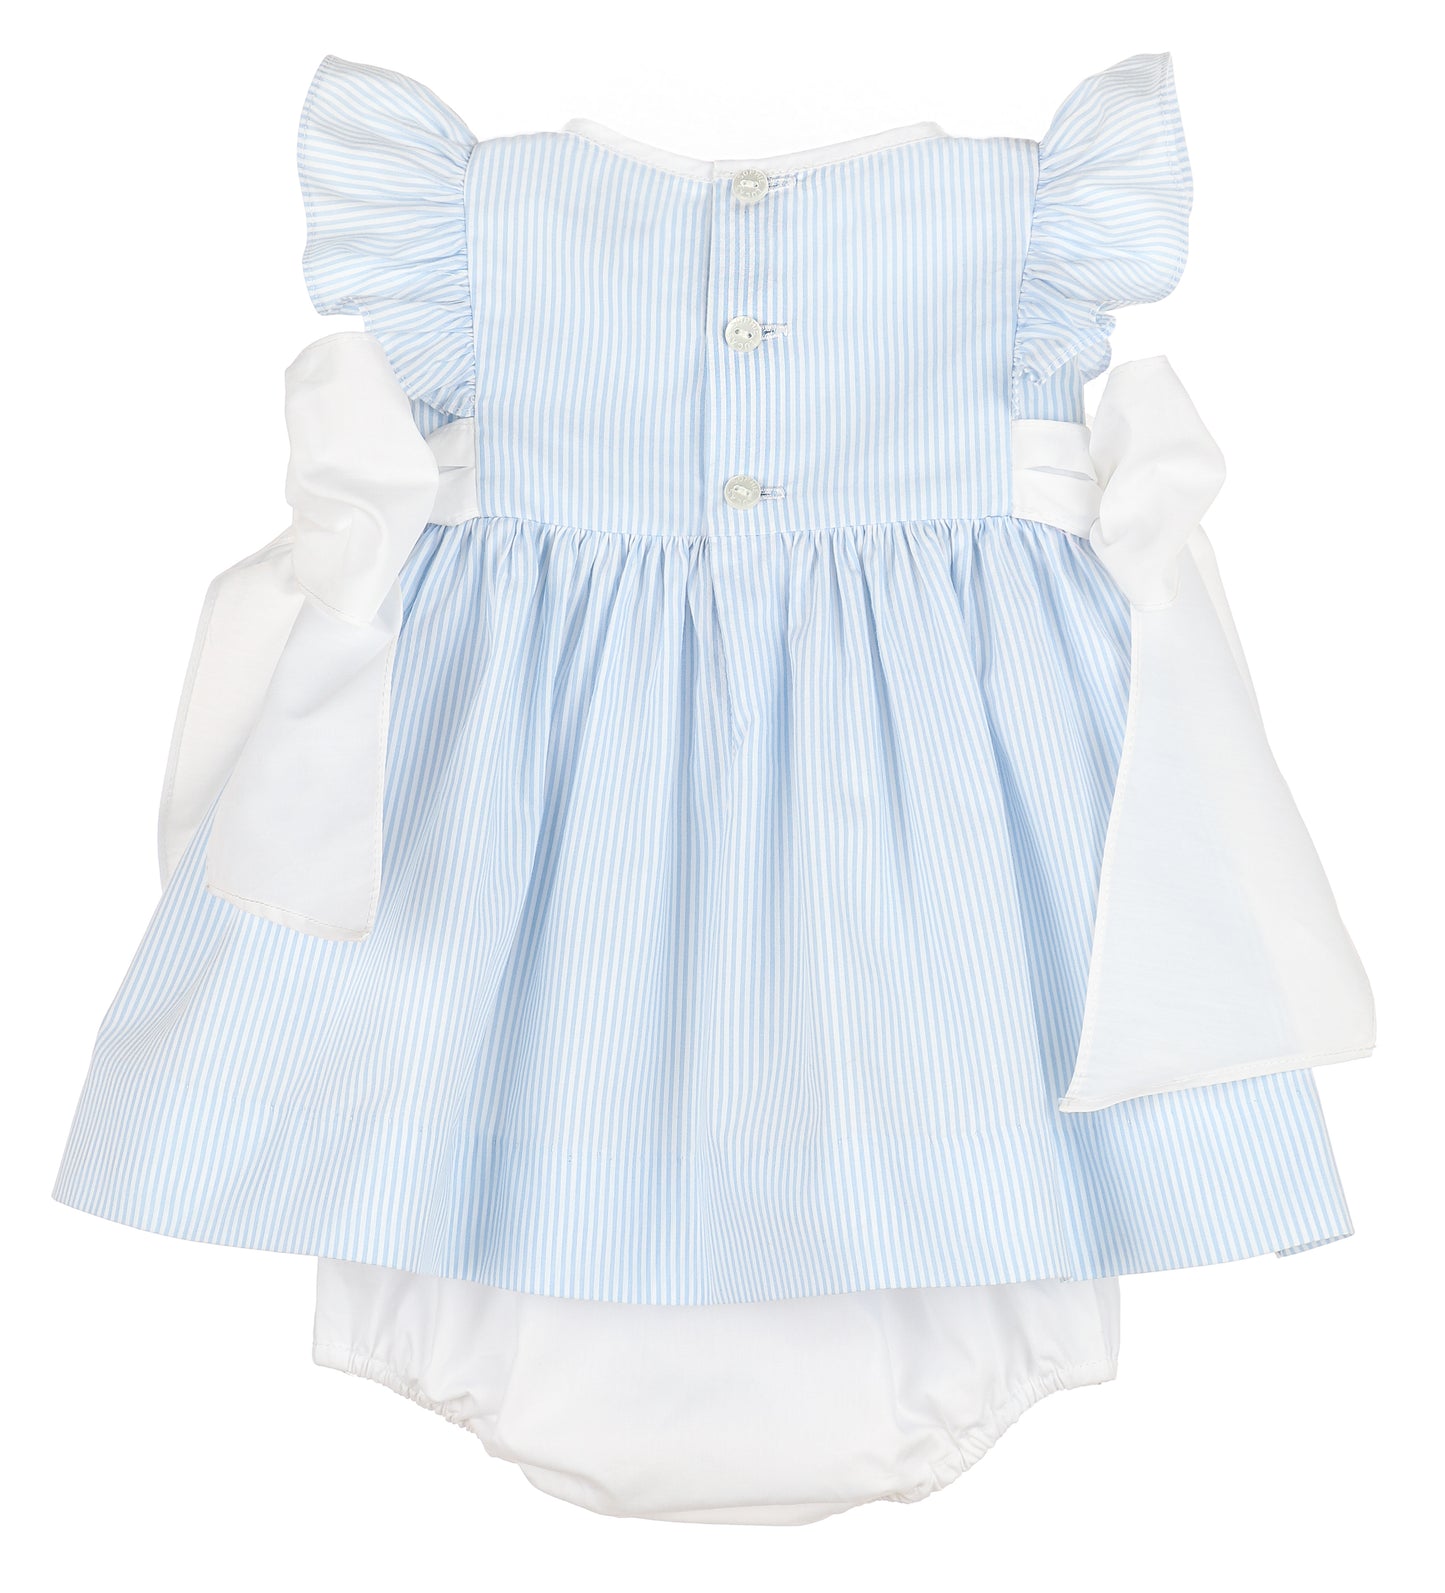 Party Animals Dress with Bows in Blue